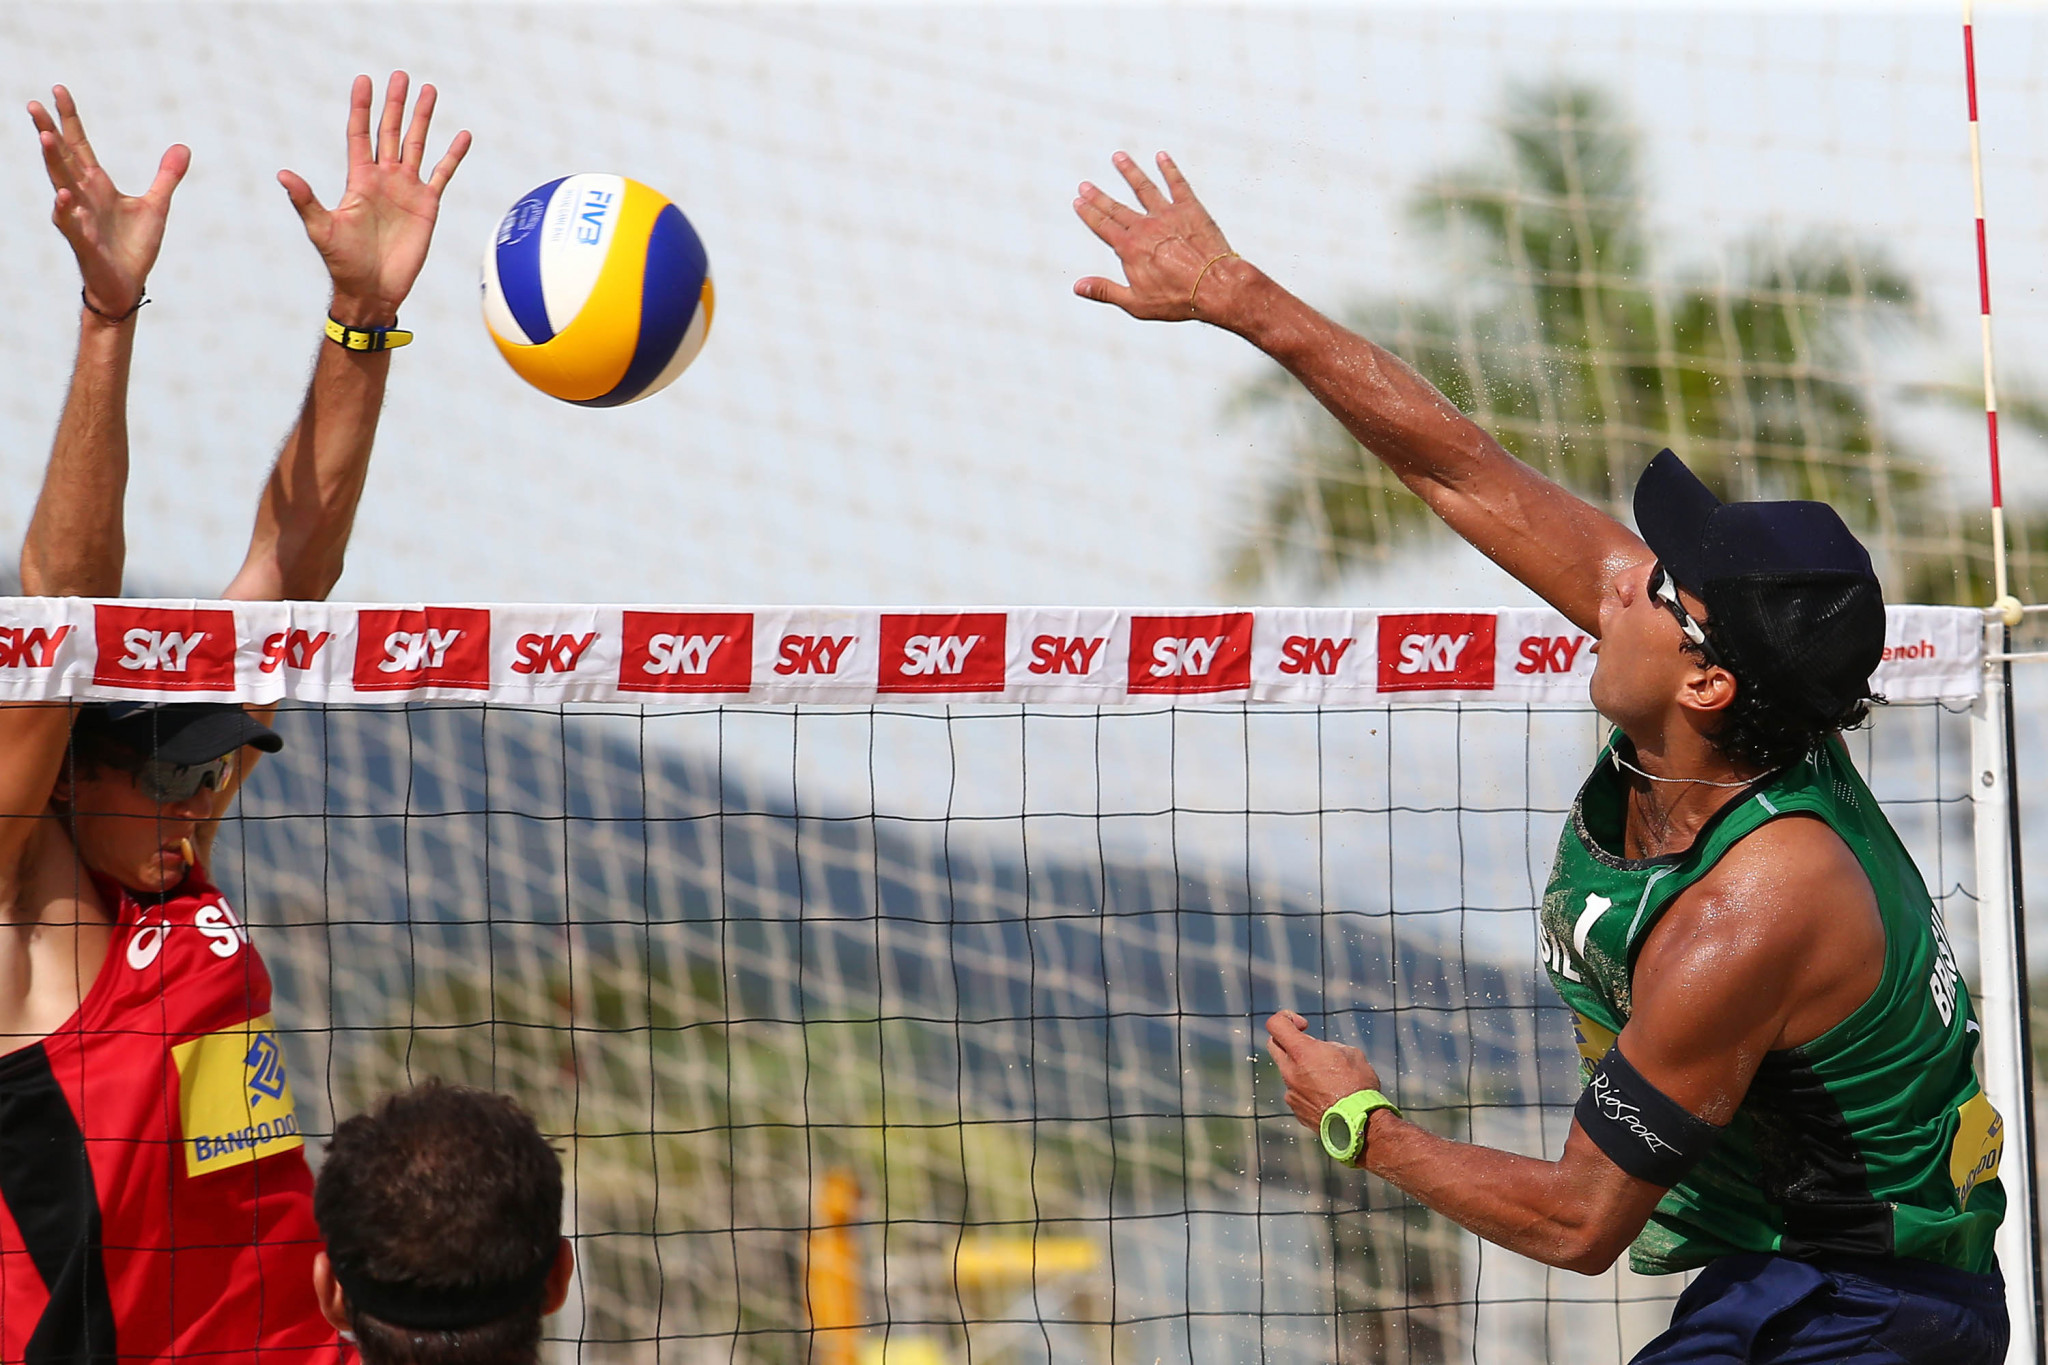 Brazil's Ramon Ferreira and his partner Fernando Magalhaes survived the qualifier in Itapema ©FIVB